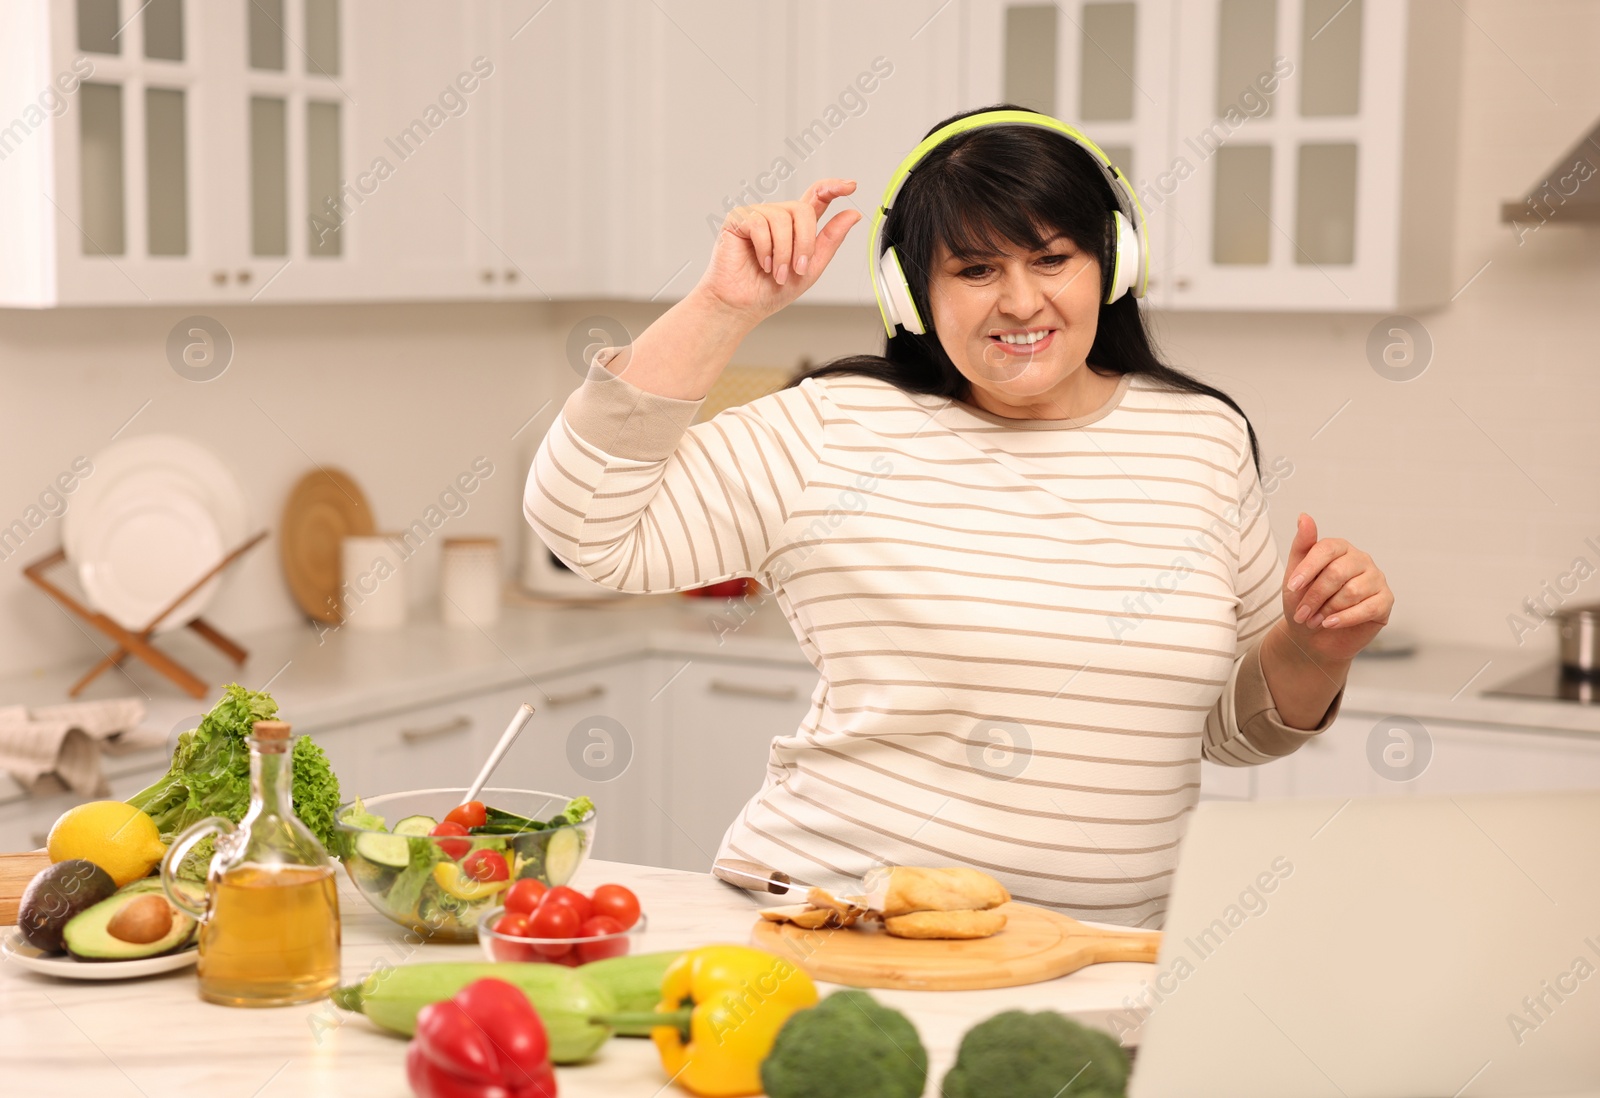 Photo of Happy overweight woman with headphones dancing while cooking in kitchen